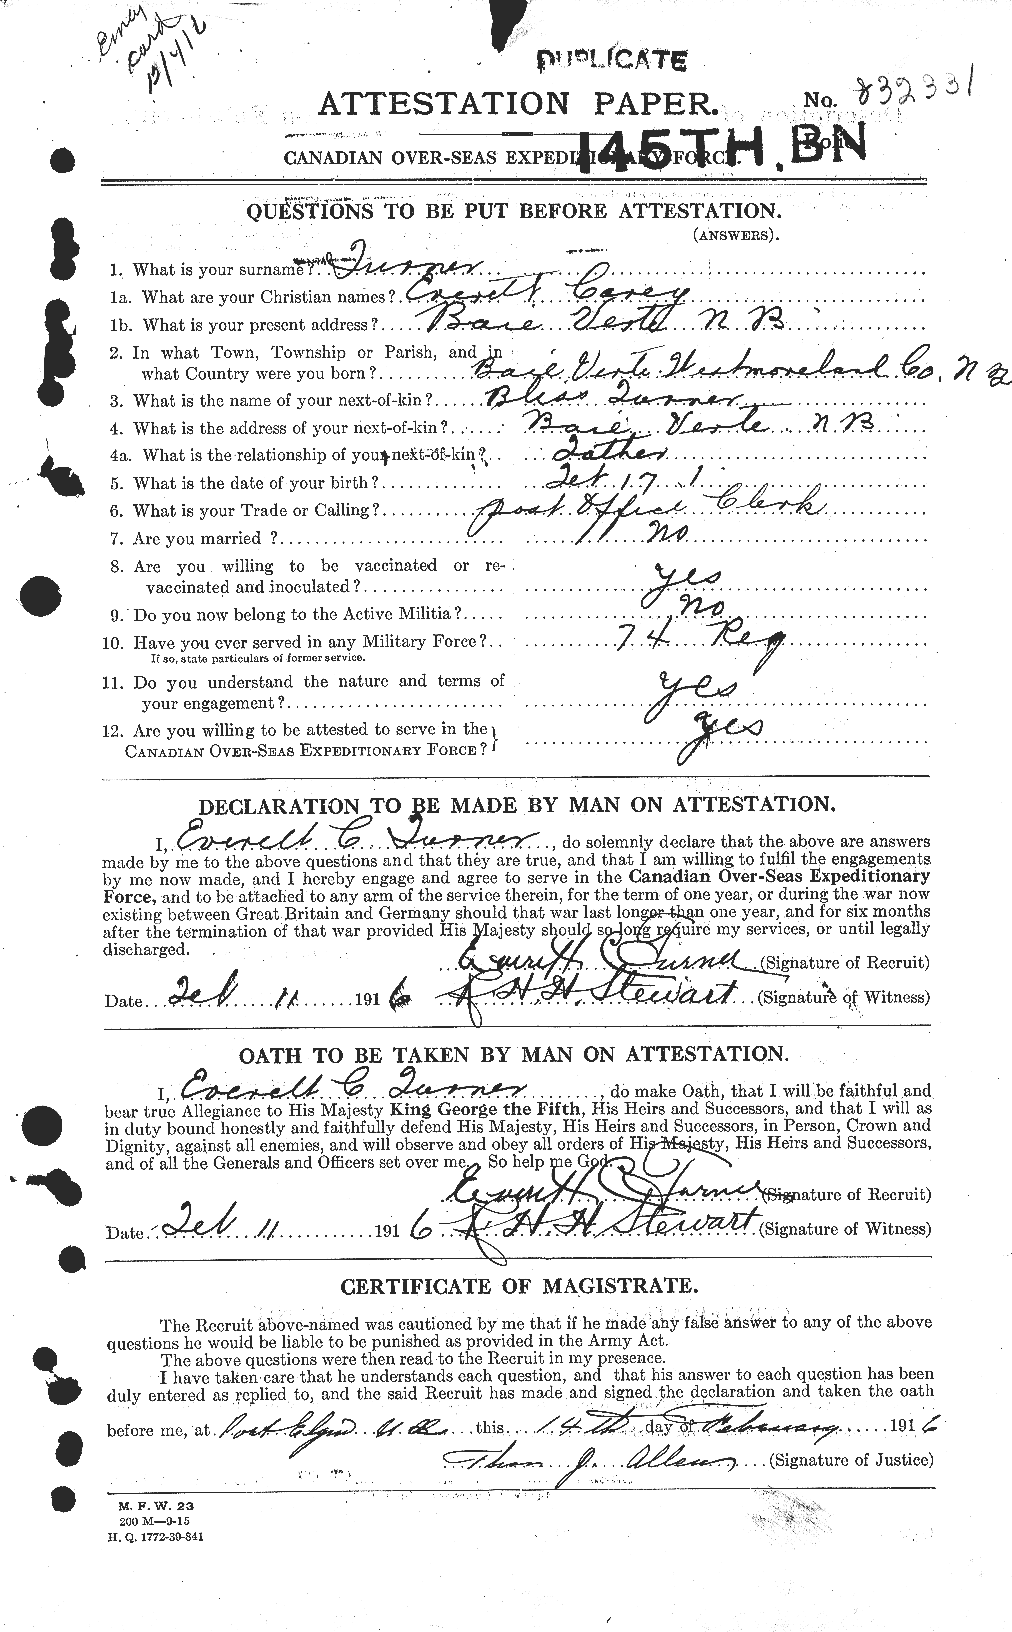 Personnel Records of the First World War - CEF 648420a